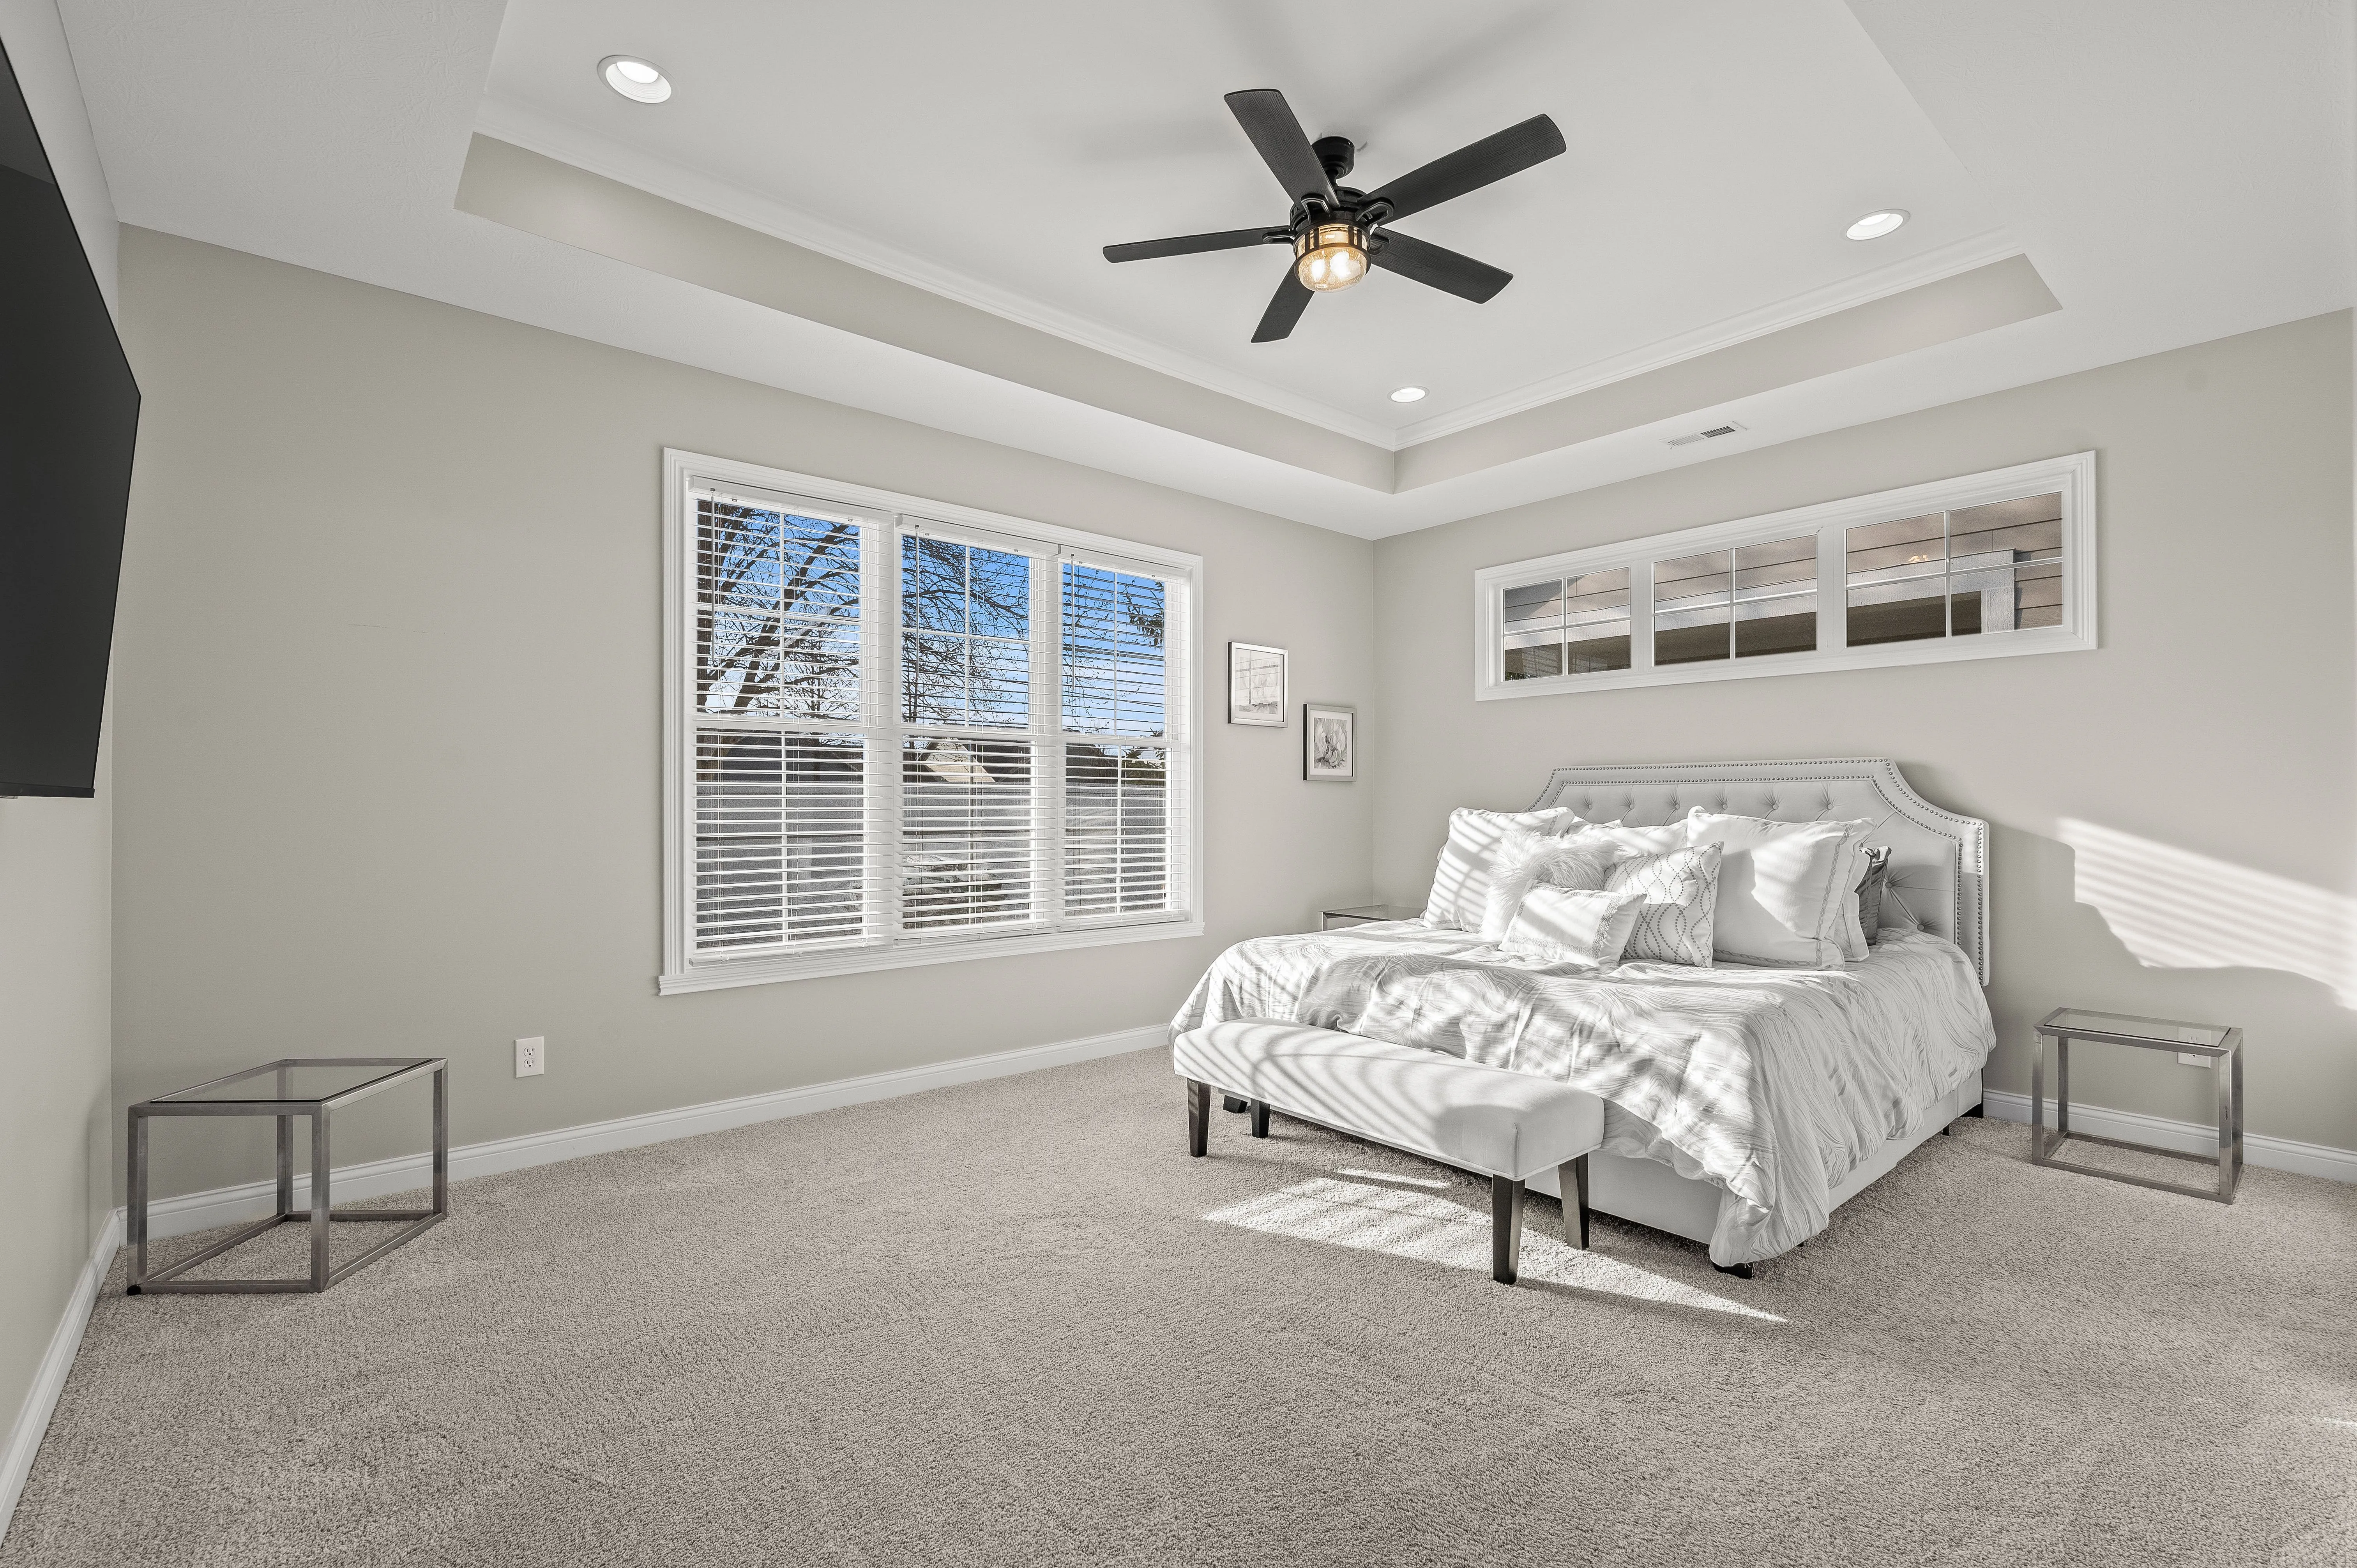 Modern bedroom with a white bed, carpeted floor, ceiling fan, and sunlight shining through windows.